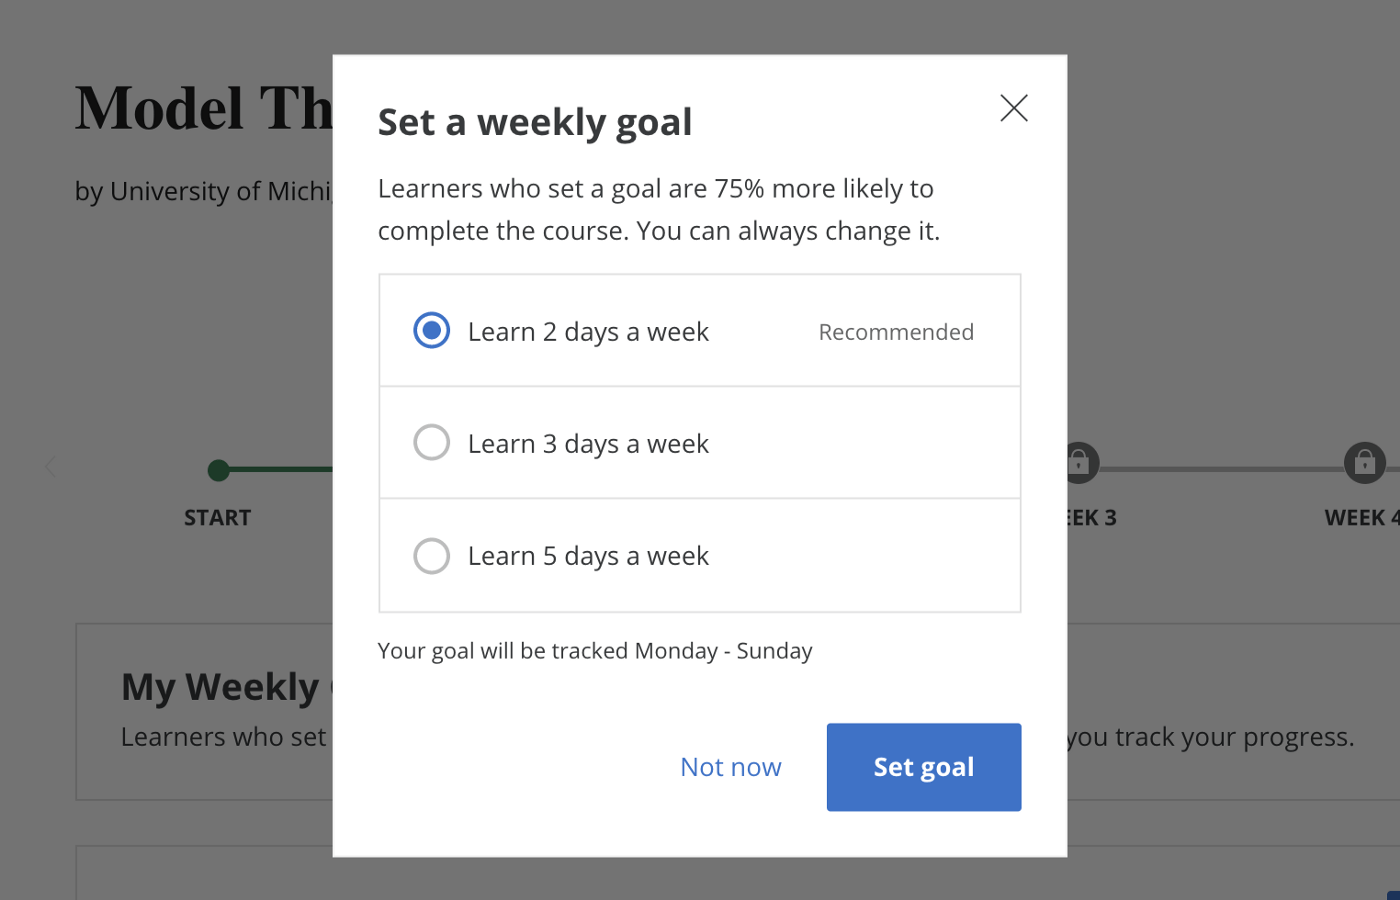 Coursera asking me to set a weekly goal